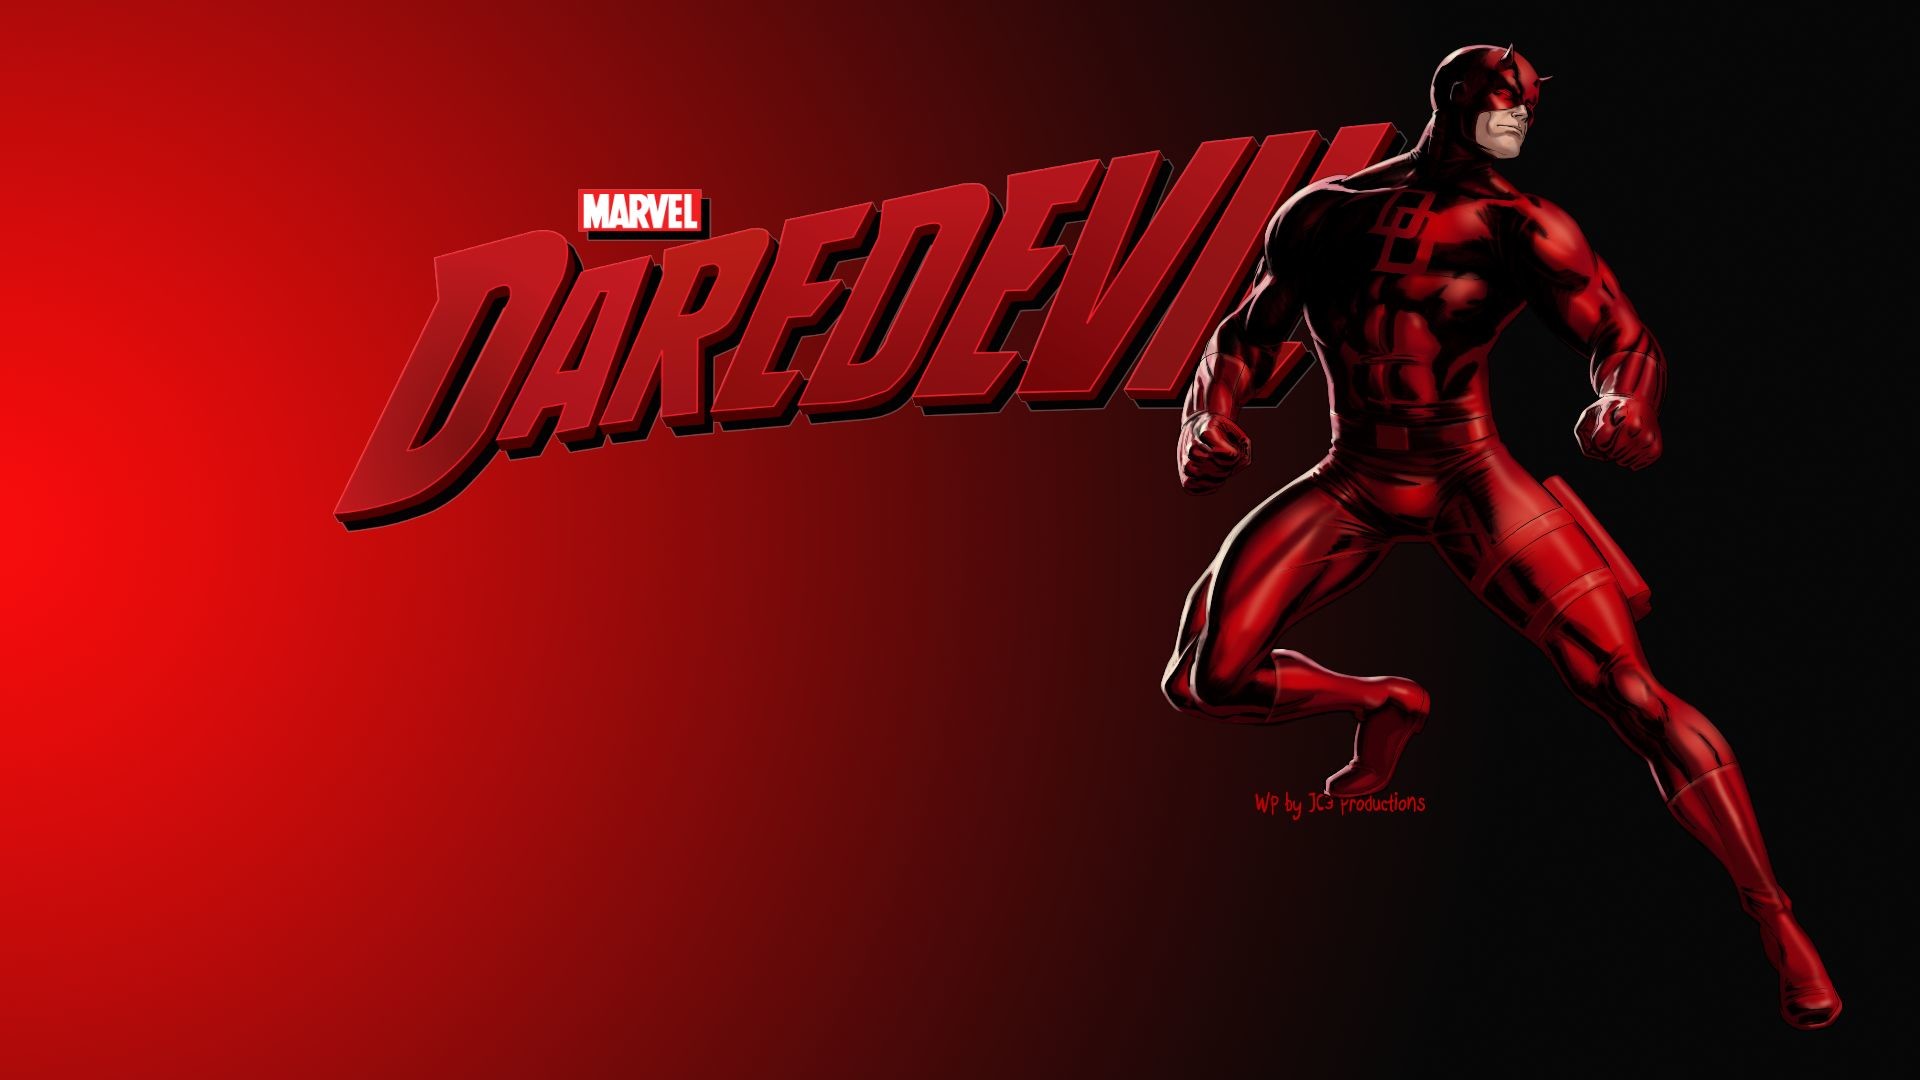 1920x1080 Daredevil images Daredevil 2 HD wallpaper and background photos